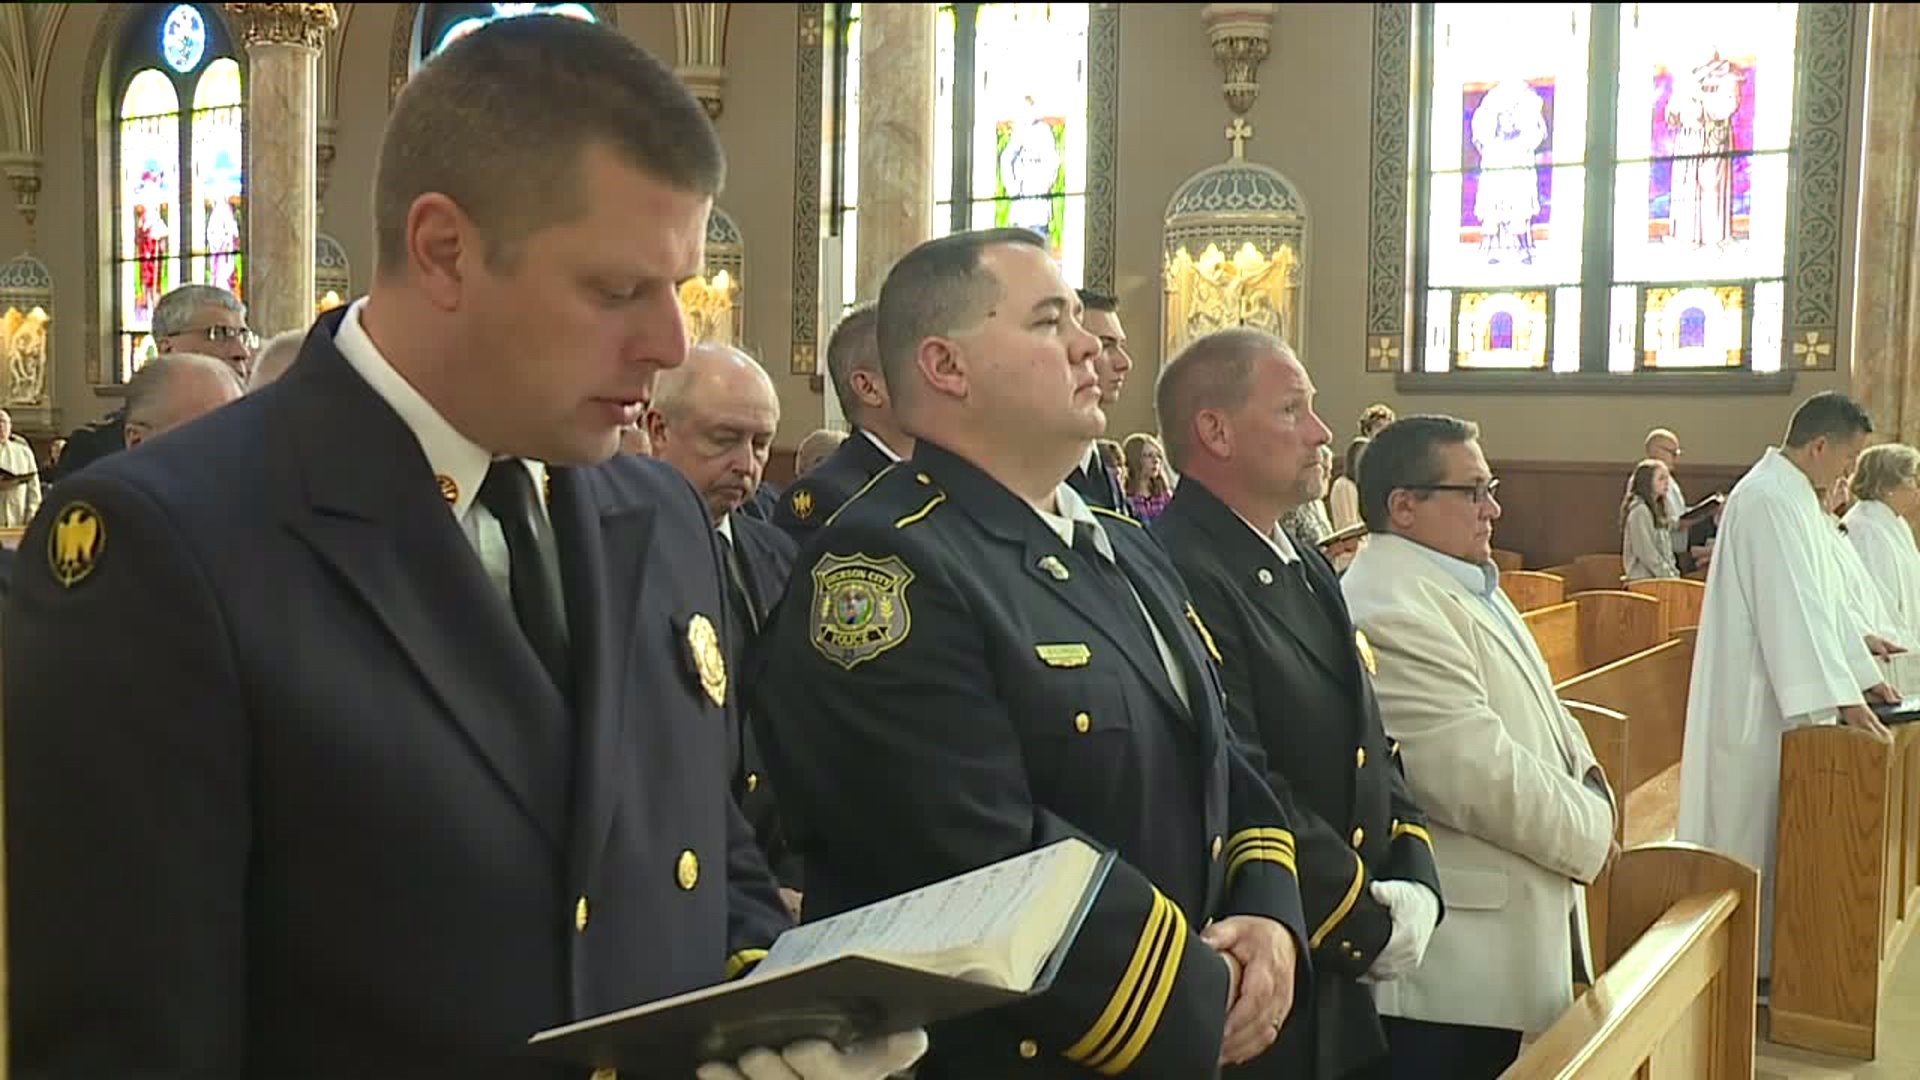 Blue Mass Honors First Responders